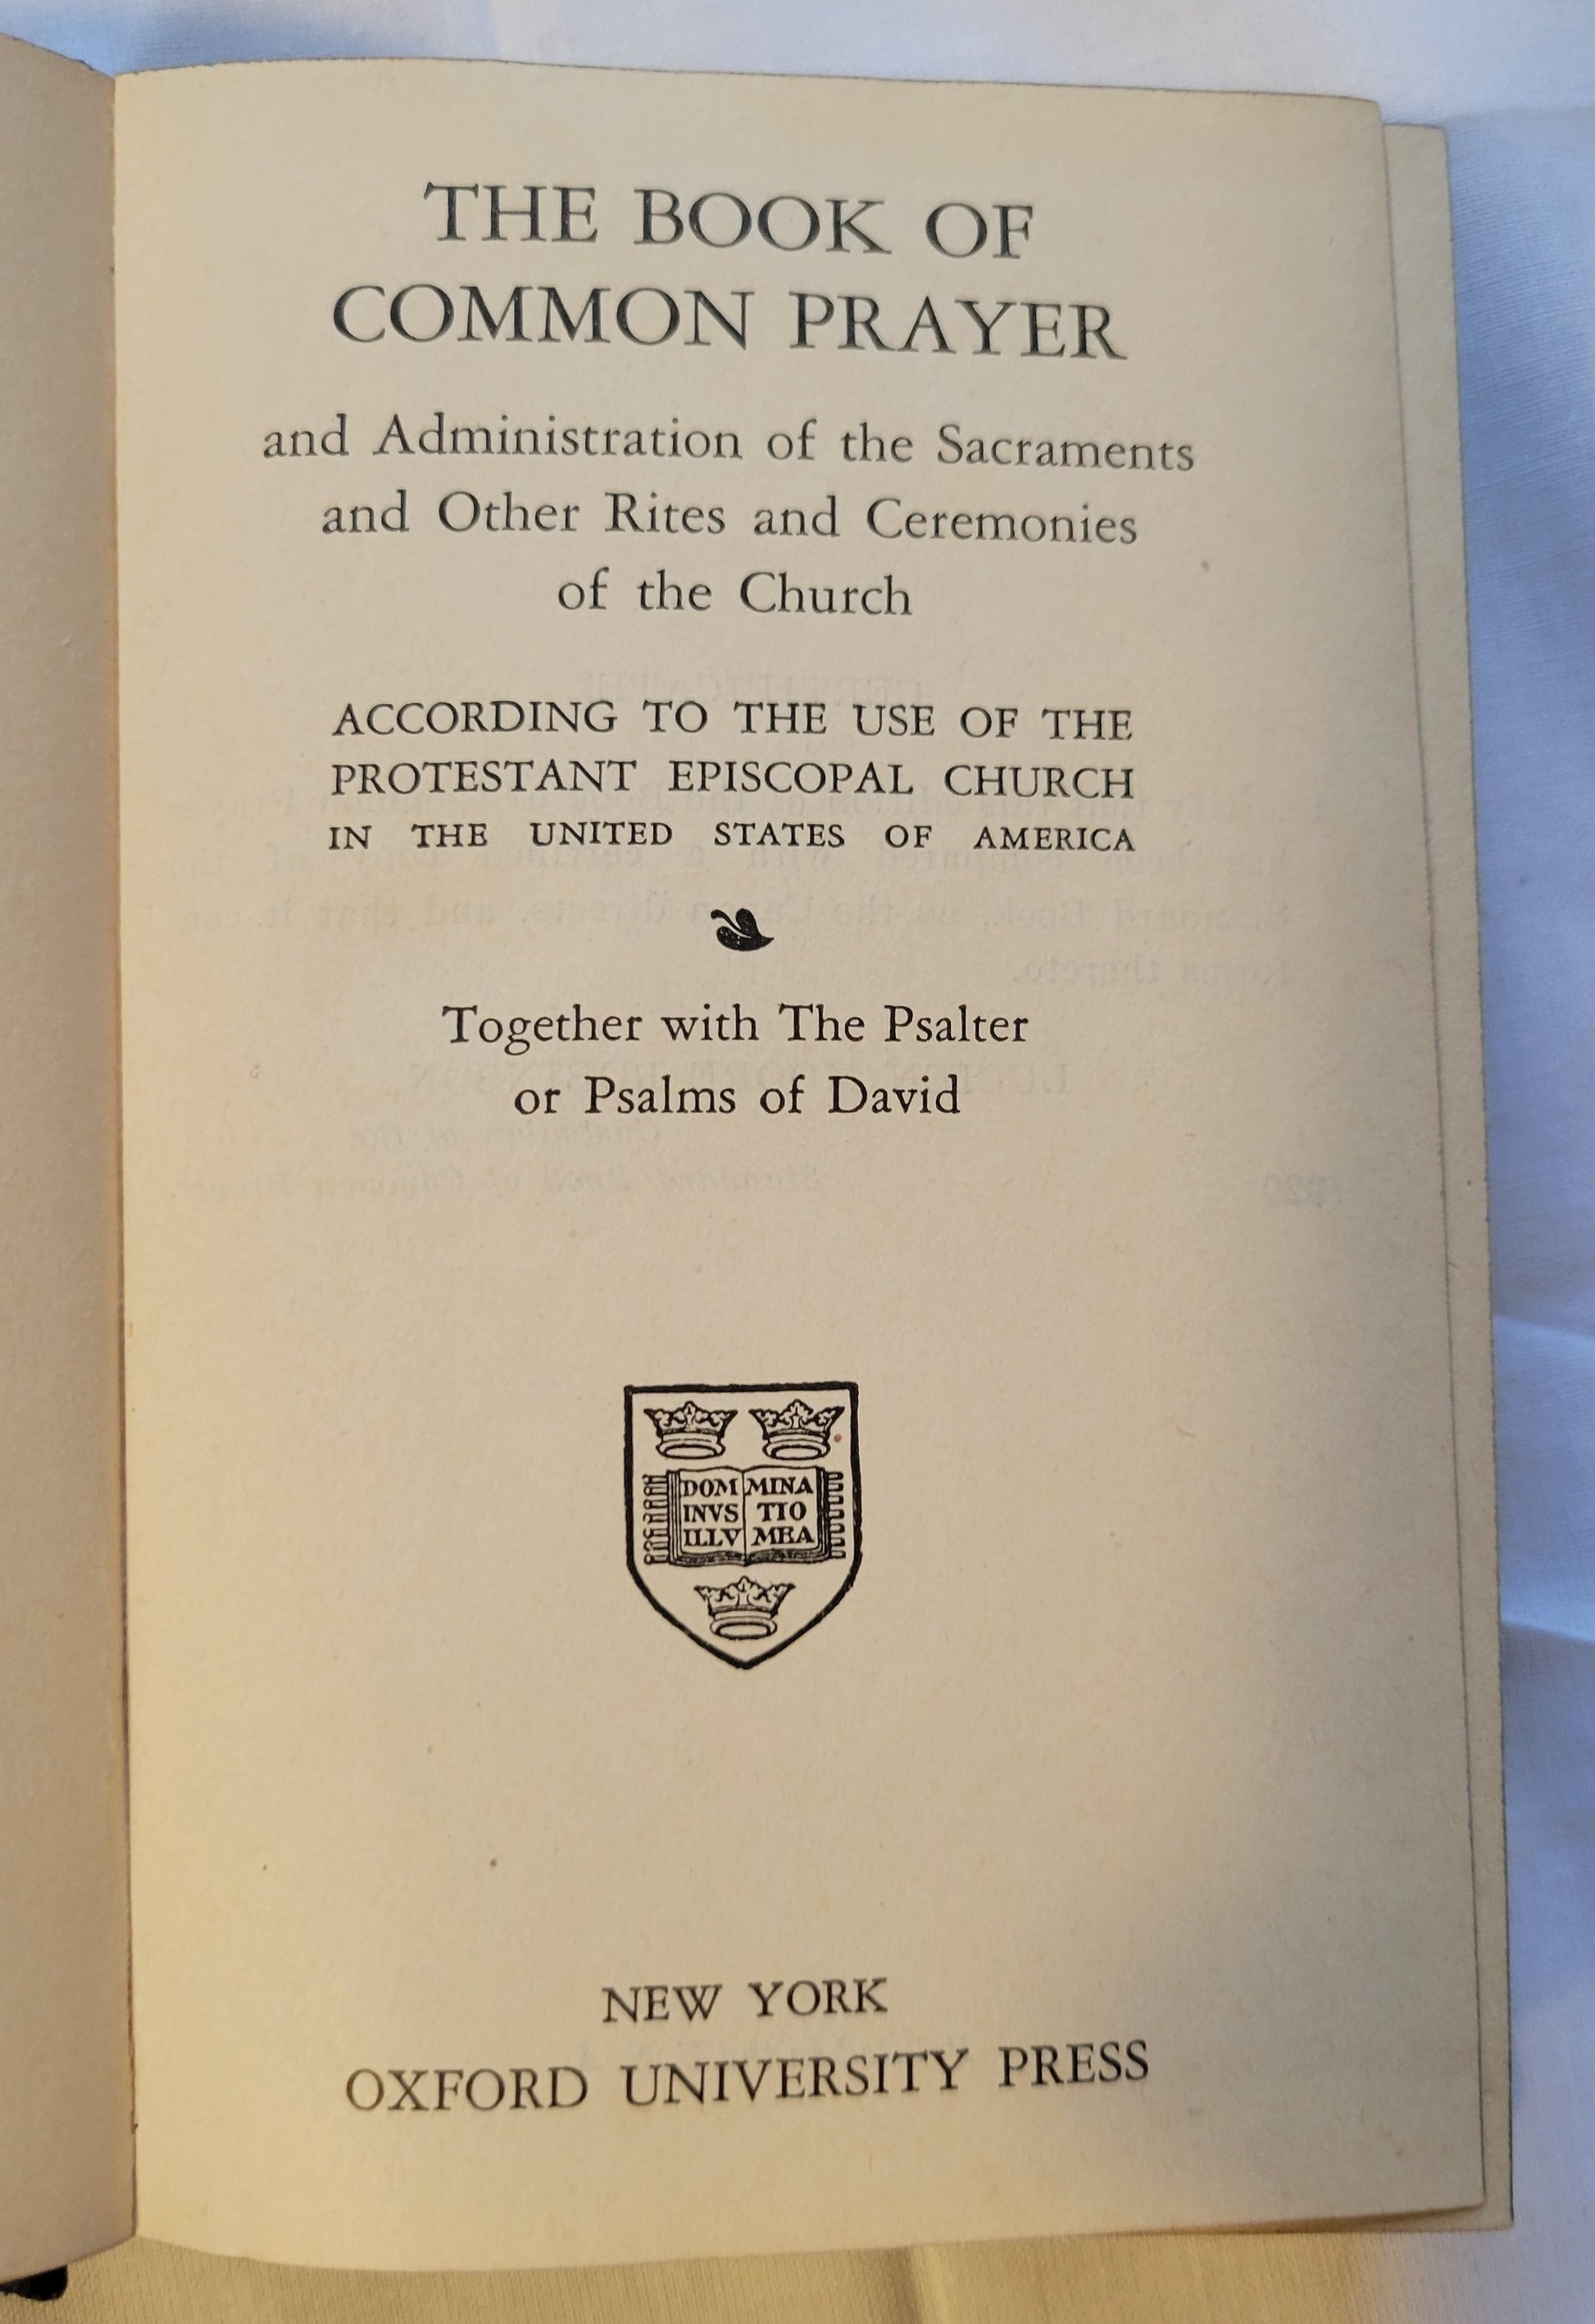  Antique book for sale "The Book of Common Prayer: And Administration of the Sacraments and Other Rites and Ceremonies of the Church: According to the Use of the Protestant Episcopal Church in the United States of America", published by Oxford University Press, 1929. Title page.